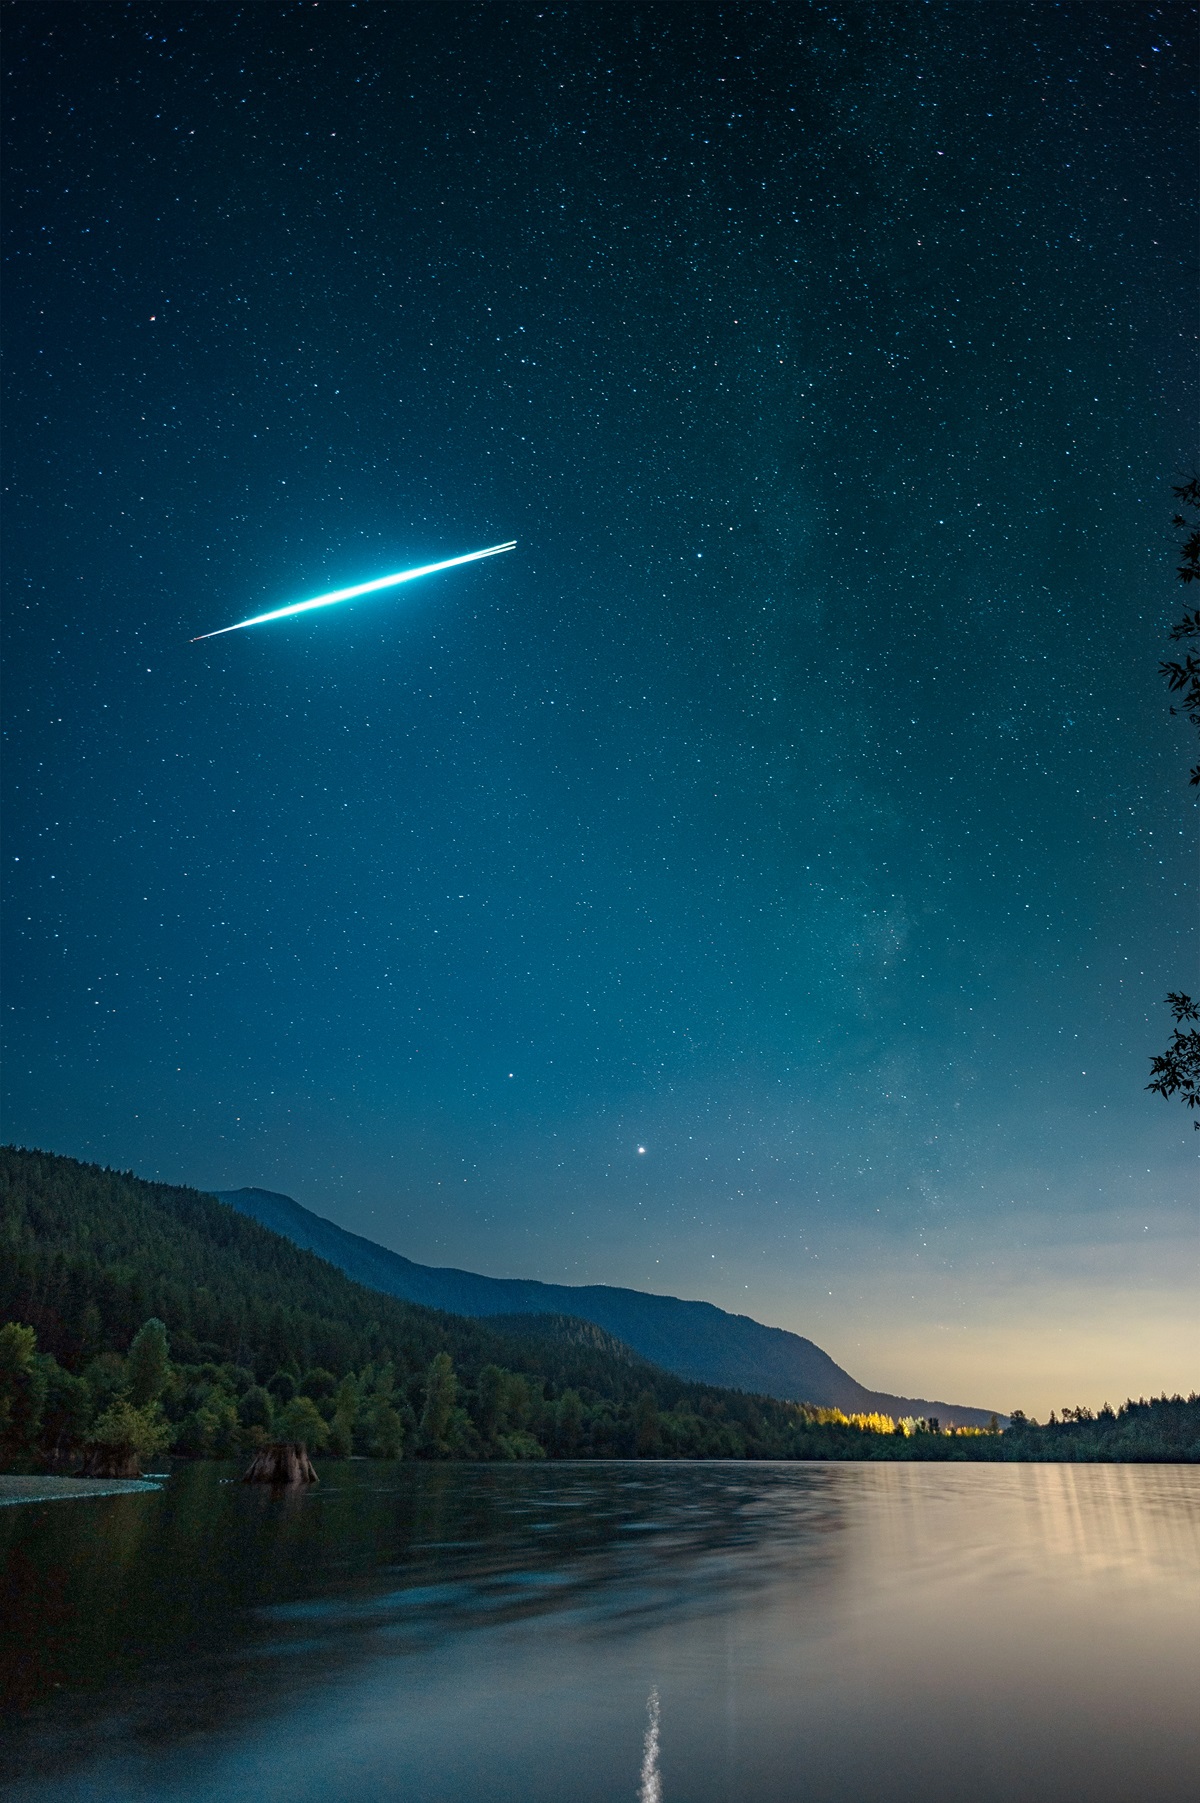 I Caught This Incredible Exploding Meteor When I Went To Rattlesnake Lake In Washington, USA, Last Weekend. Zoom In To See The Exact Moment It Explodes In Two